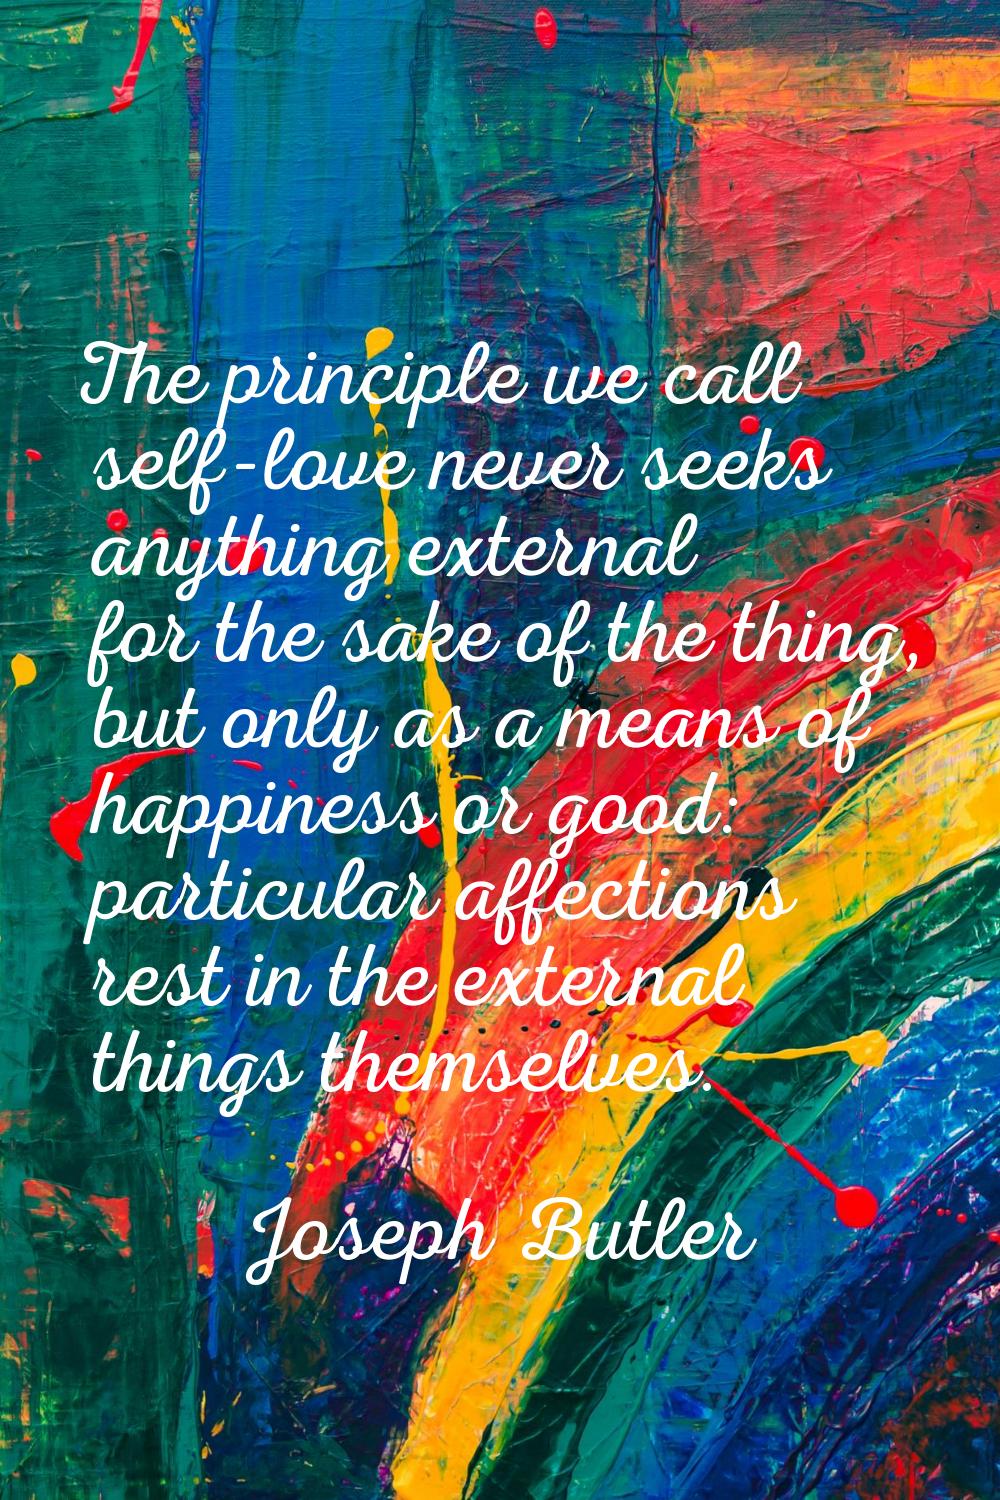 The principle we call self-love never seeks anything external for the sake of the thing, but only a